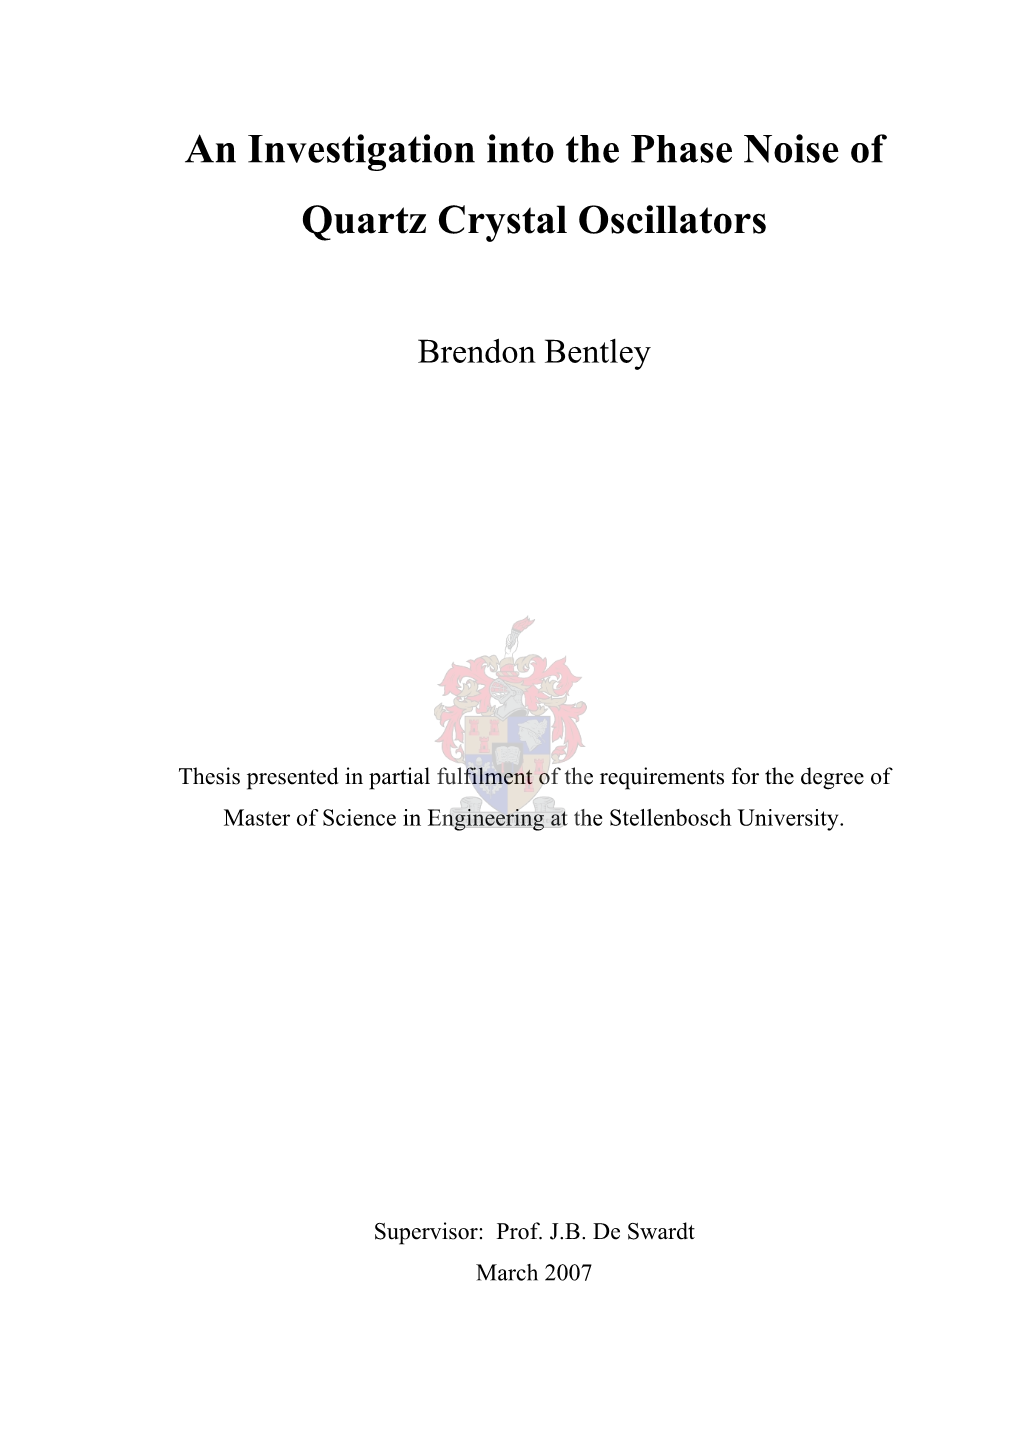 An Investigation Into the Phase Noise of Quartz Crystal Oscillators